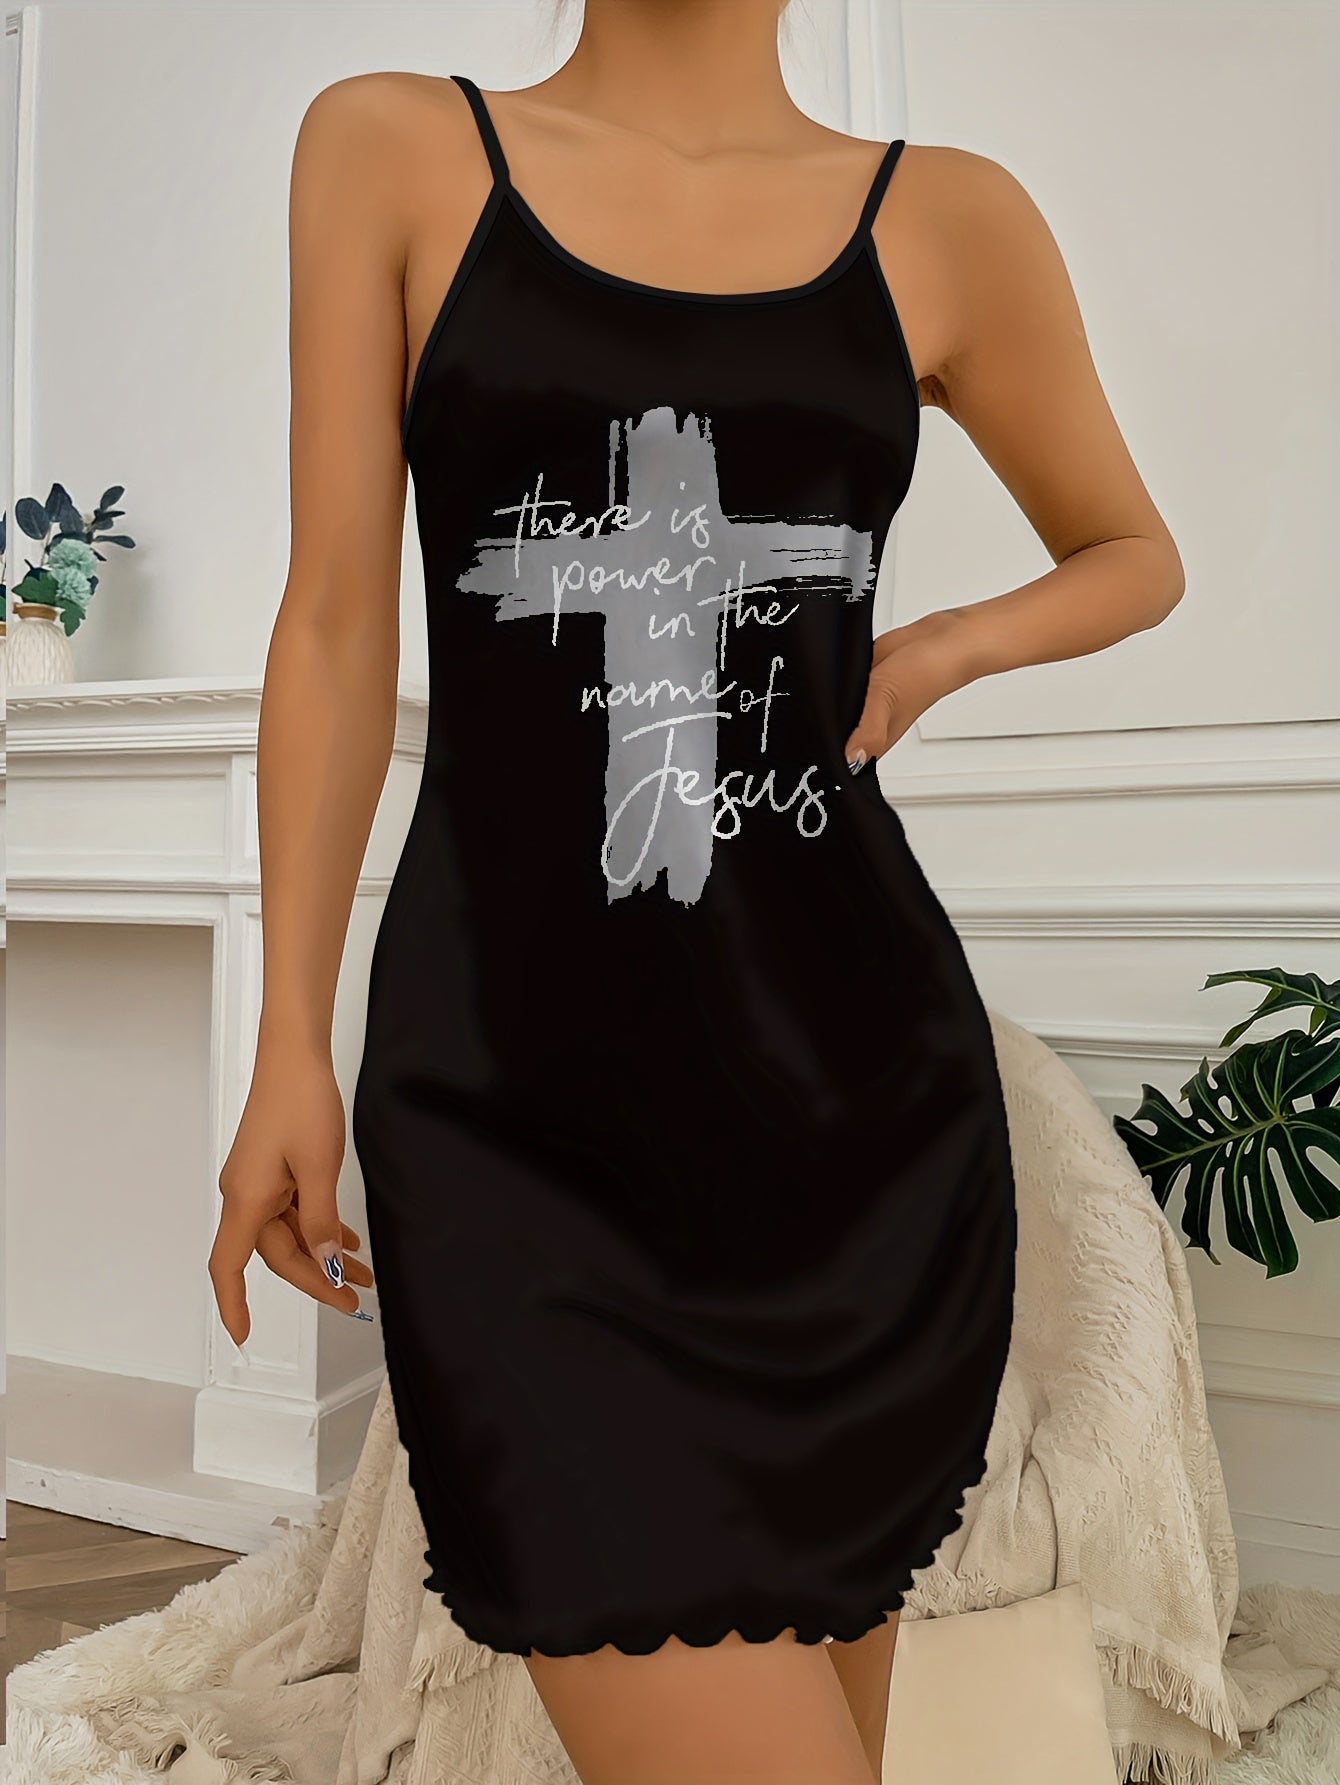 There Is Power In The Name Of Jesus Women's Christian Pajama Dress claimedbygoddesigns